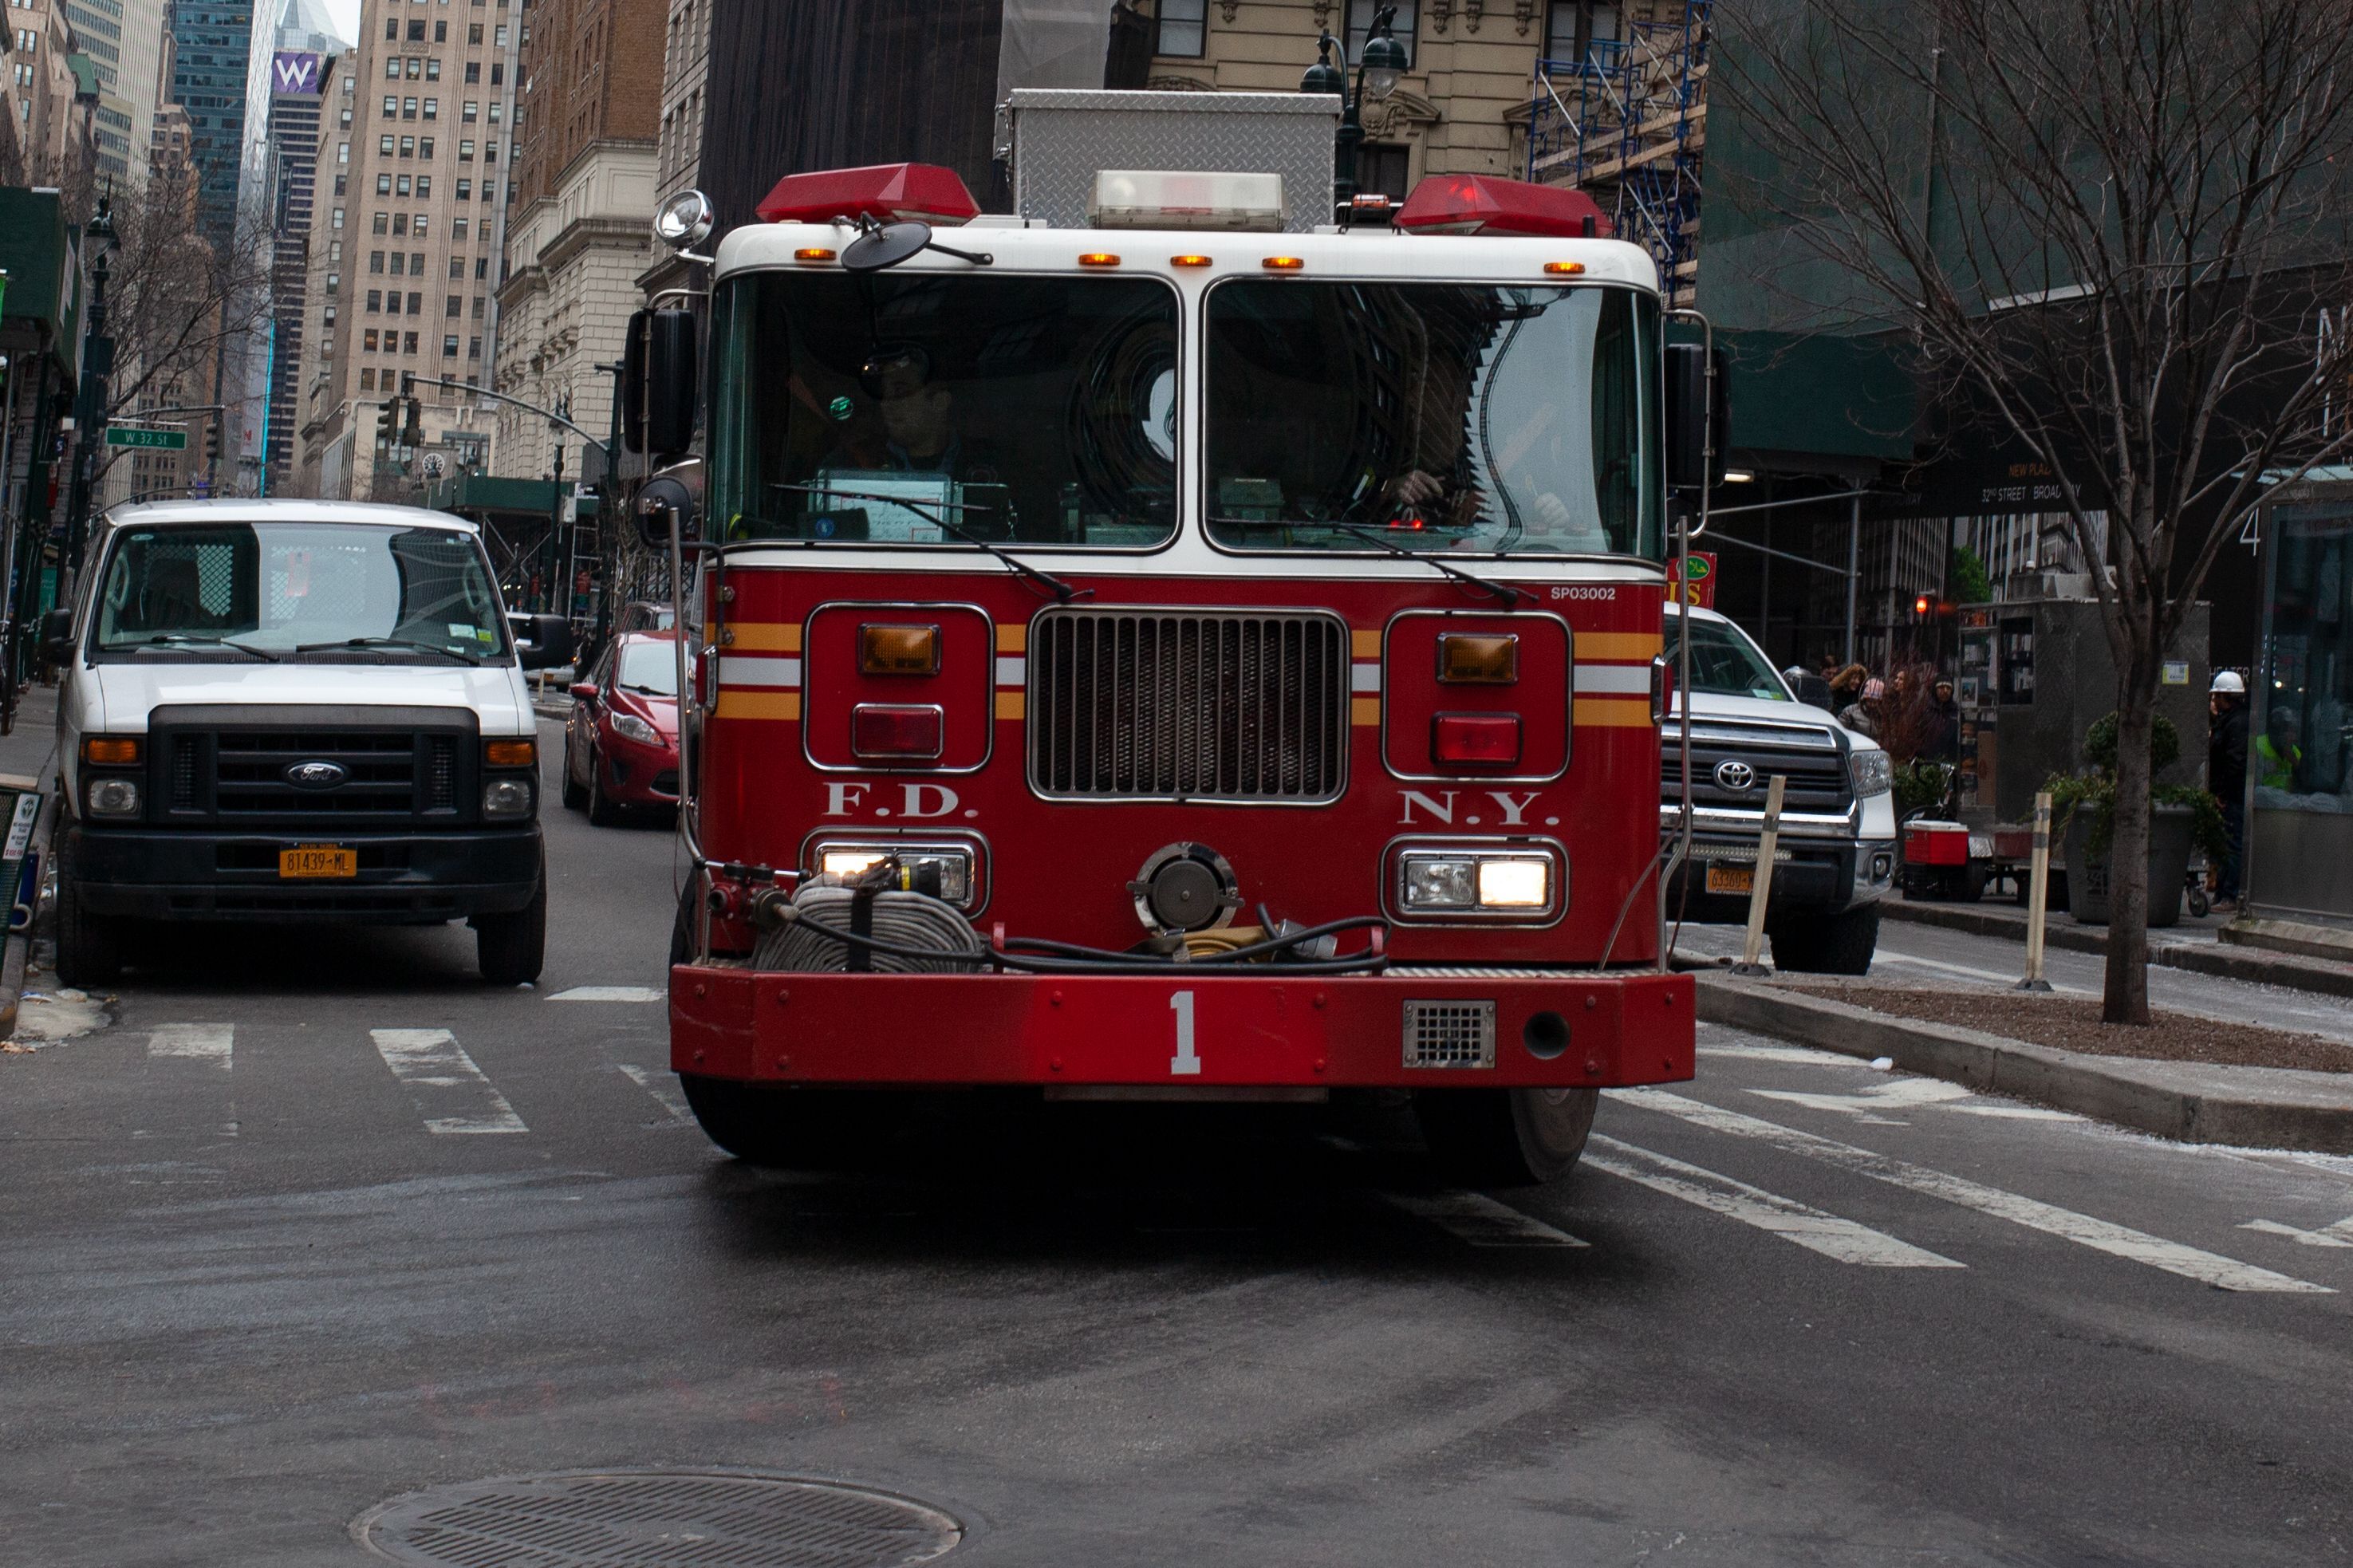 FDNY firefighters  respond to a scene in Midtown, Manhattan.